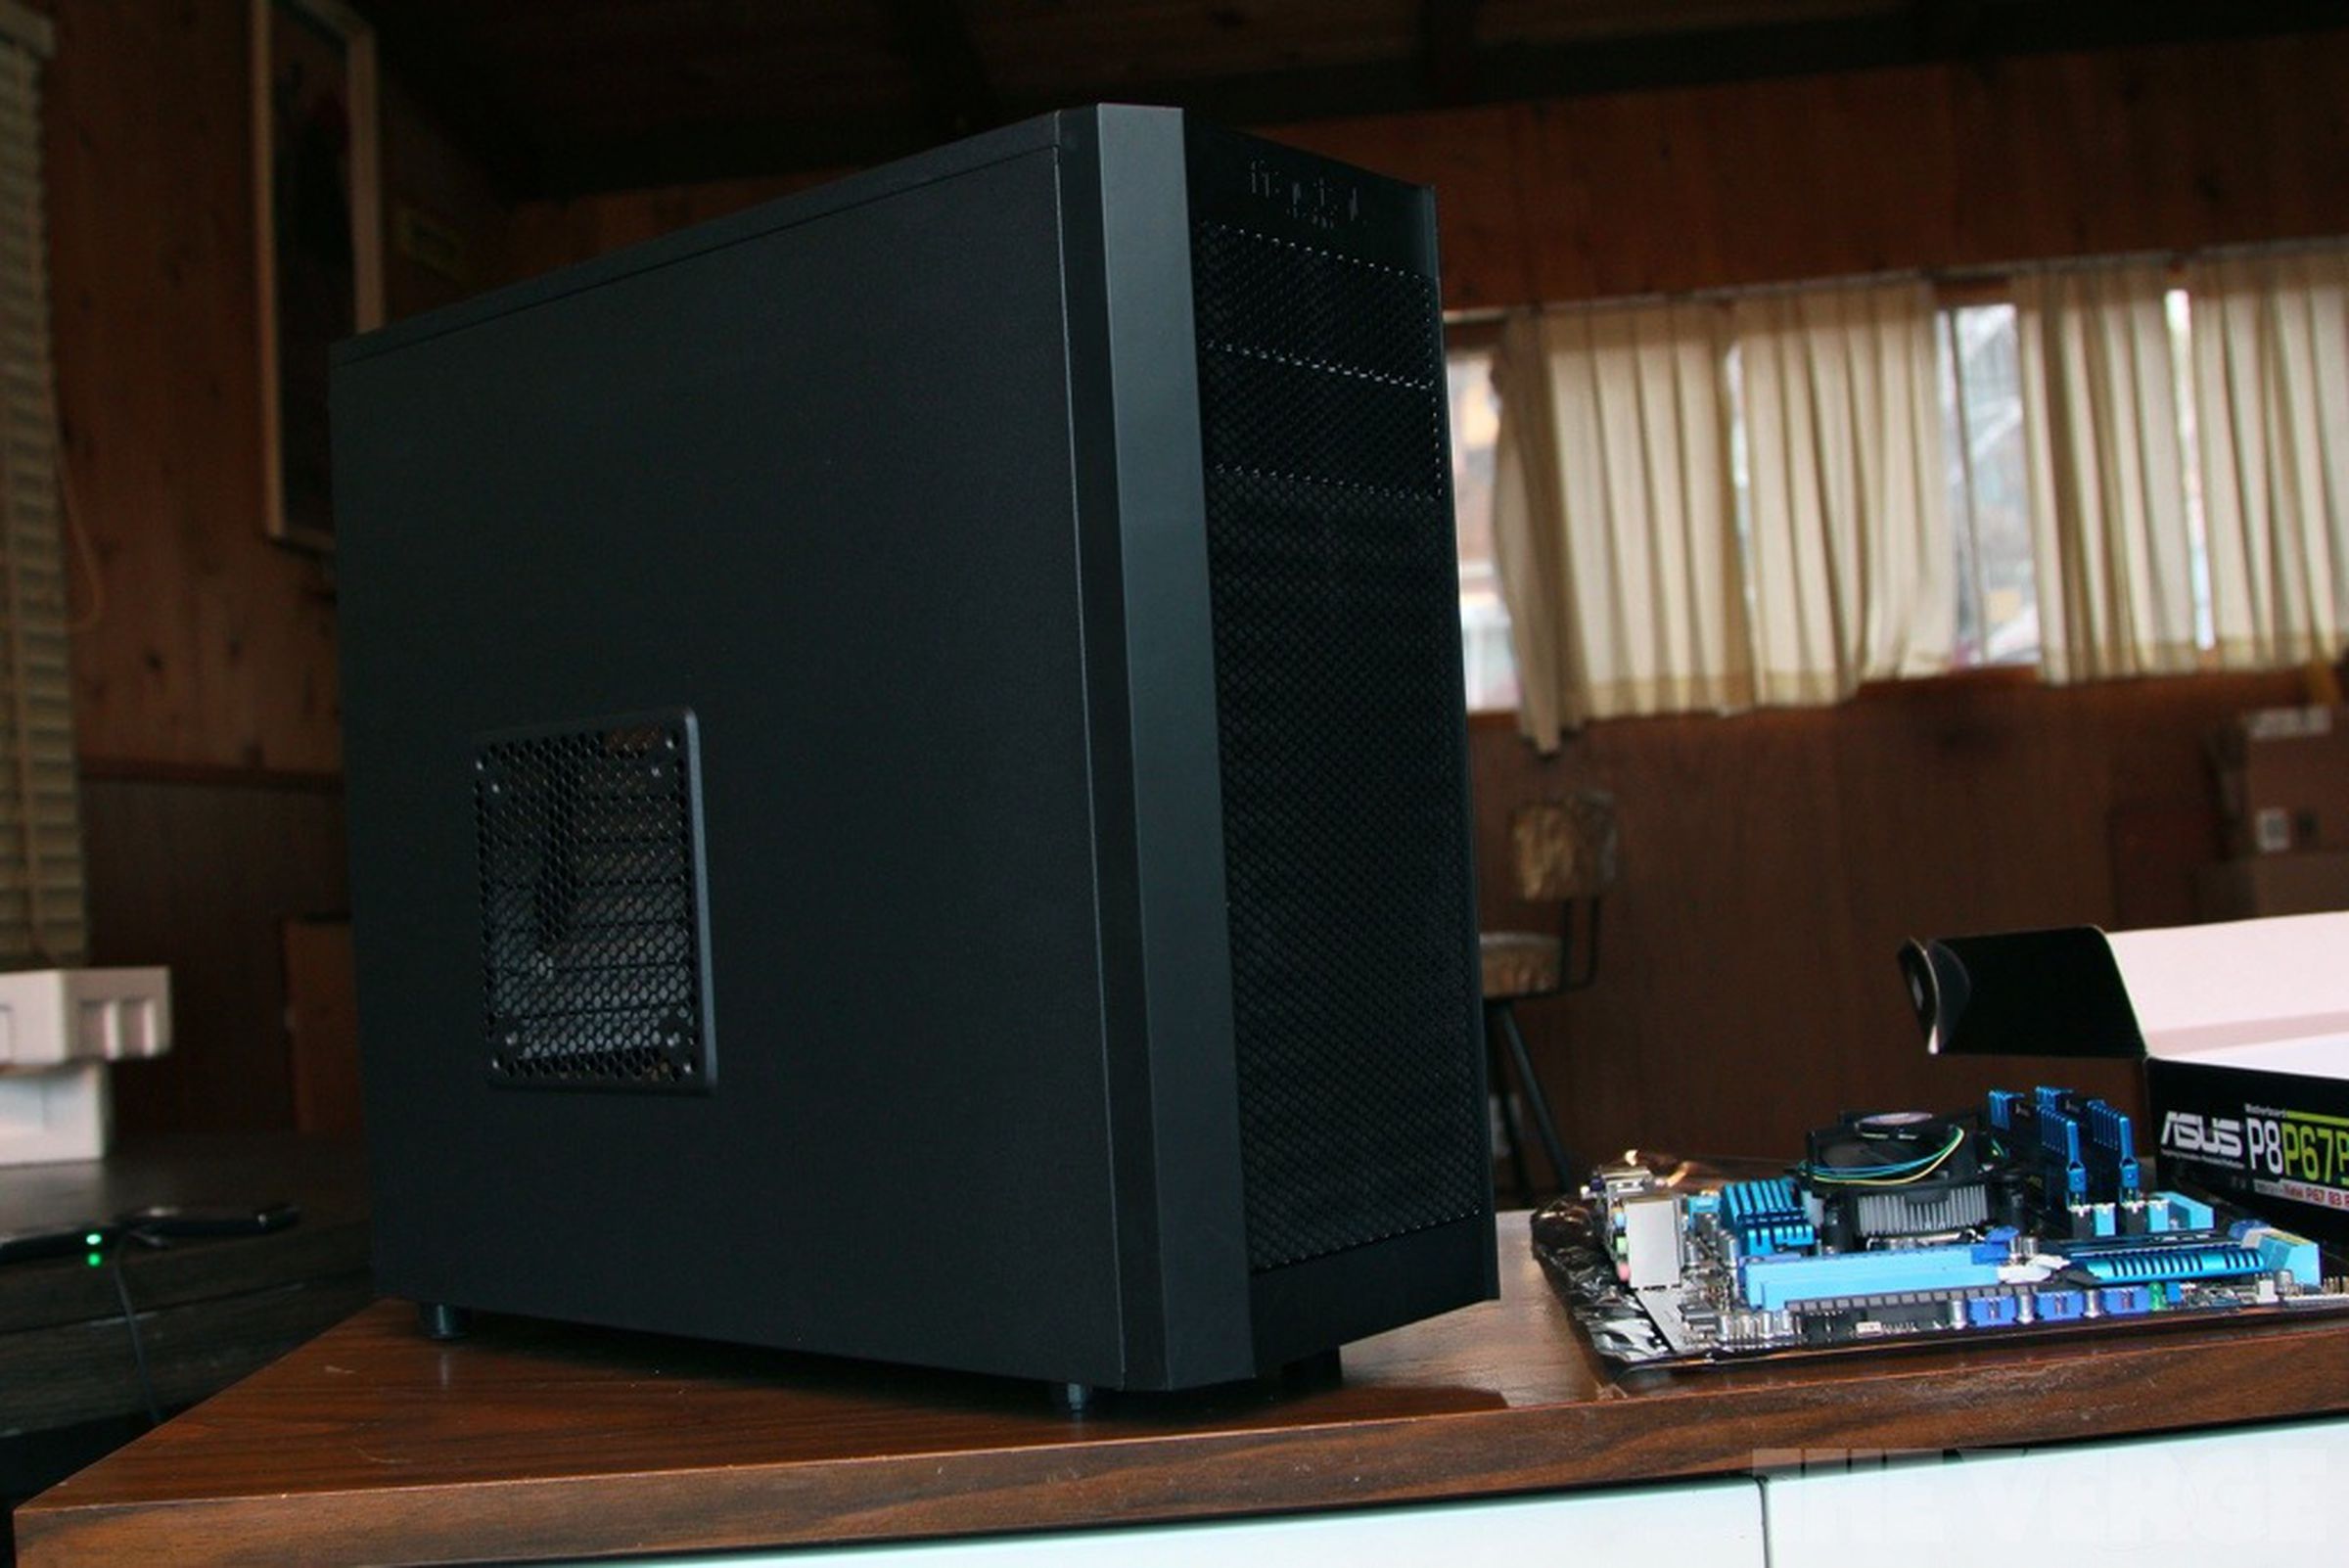 The Verge Gaming Rig: from components to completion